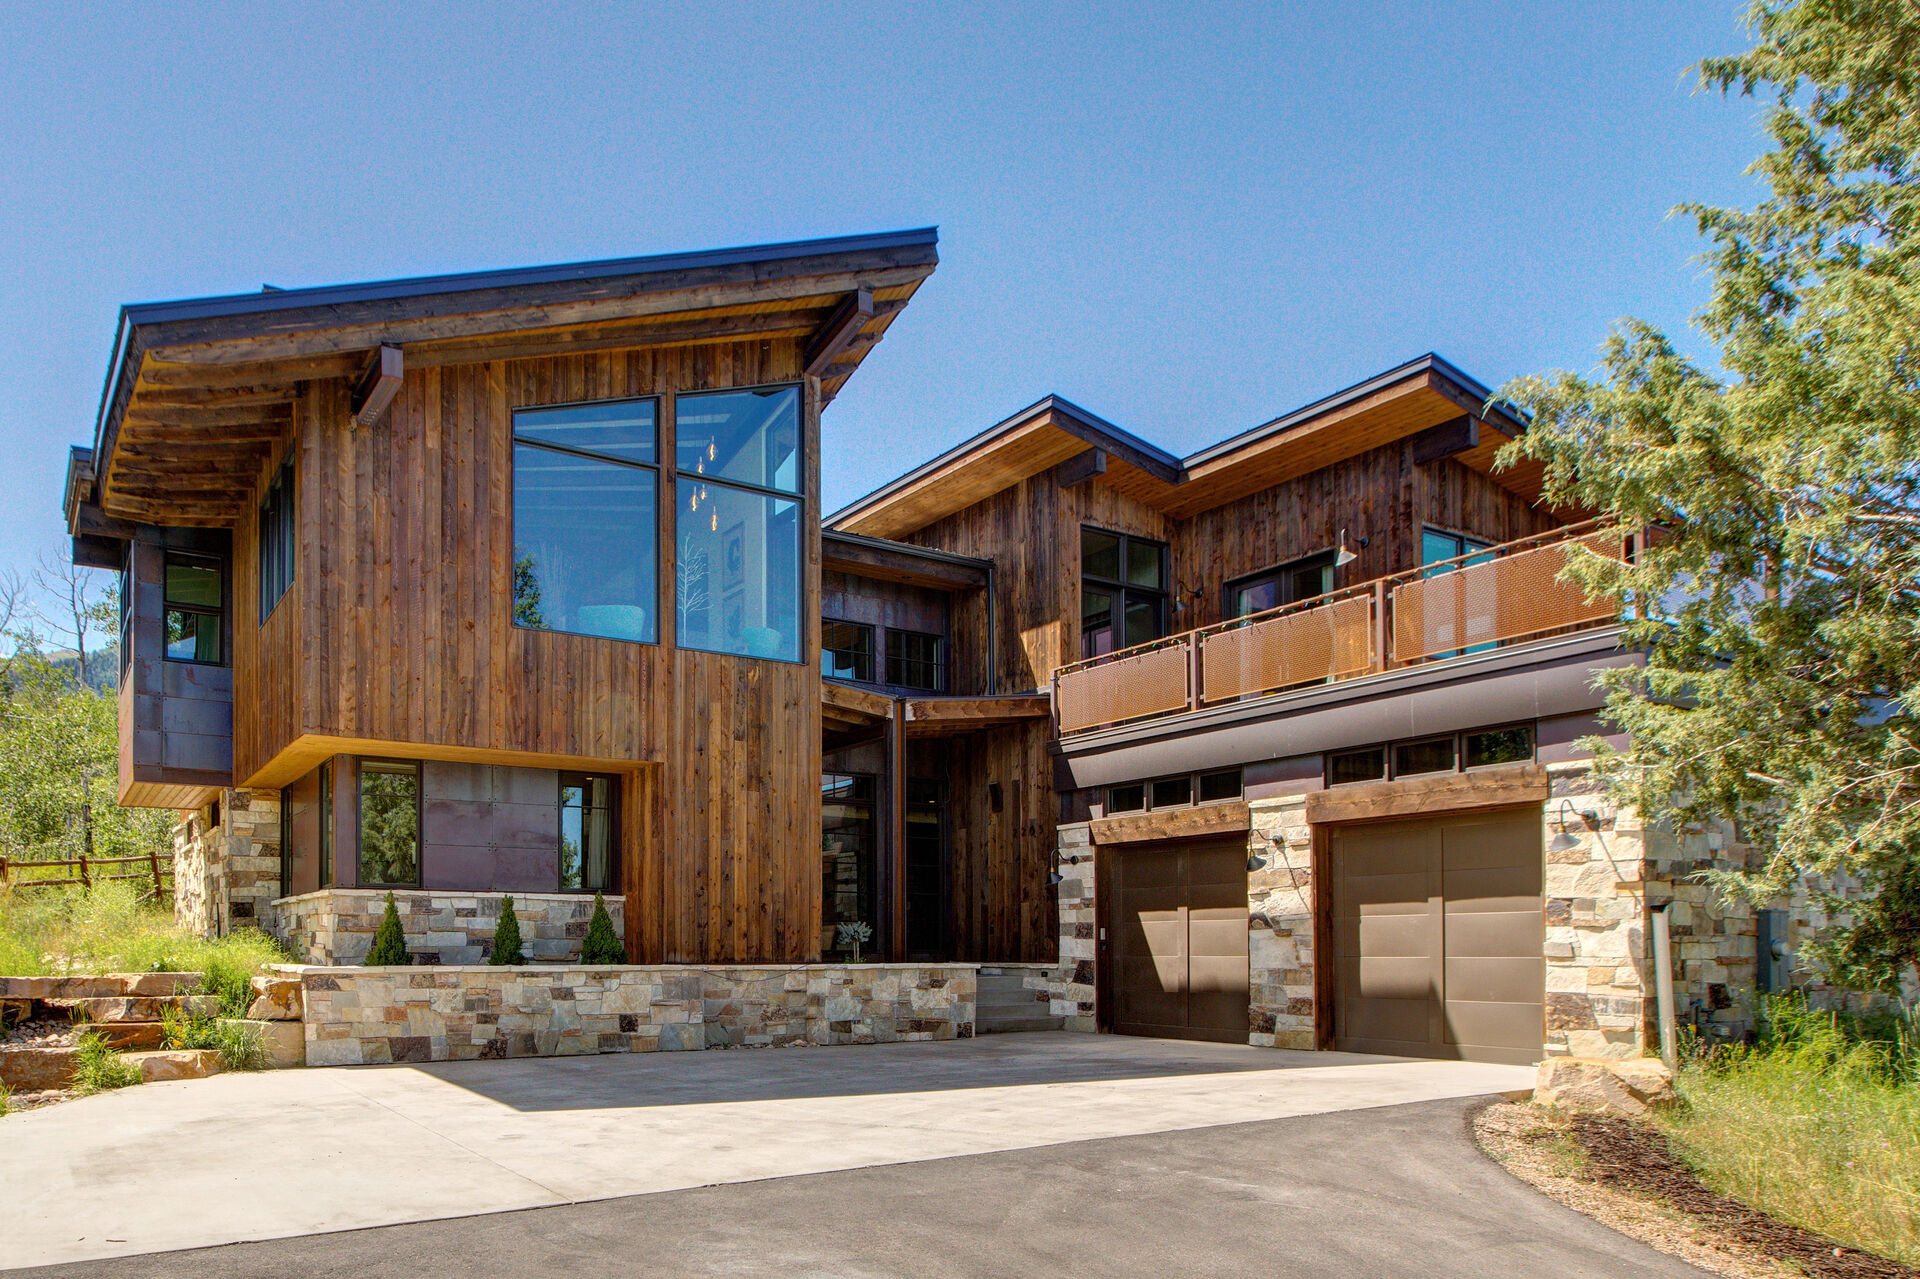 Front Picture of One of Our Four Bedroom Park City Vacation Home Rentals.